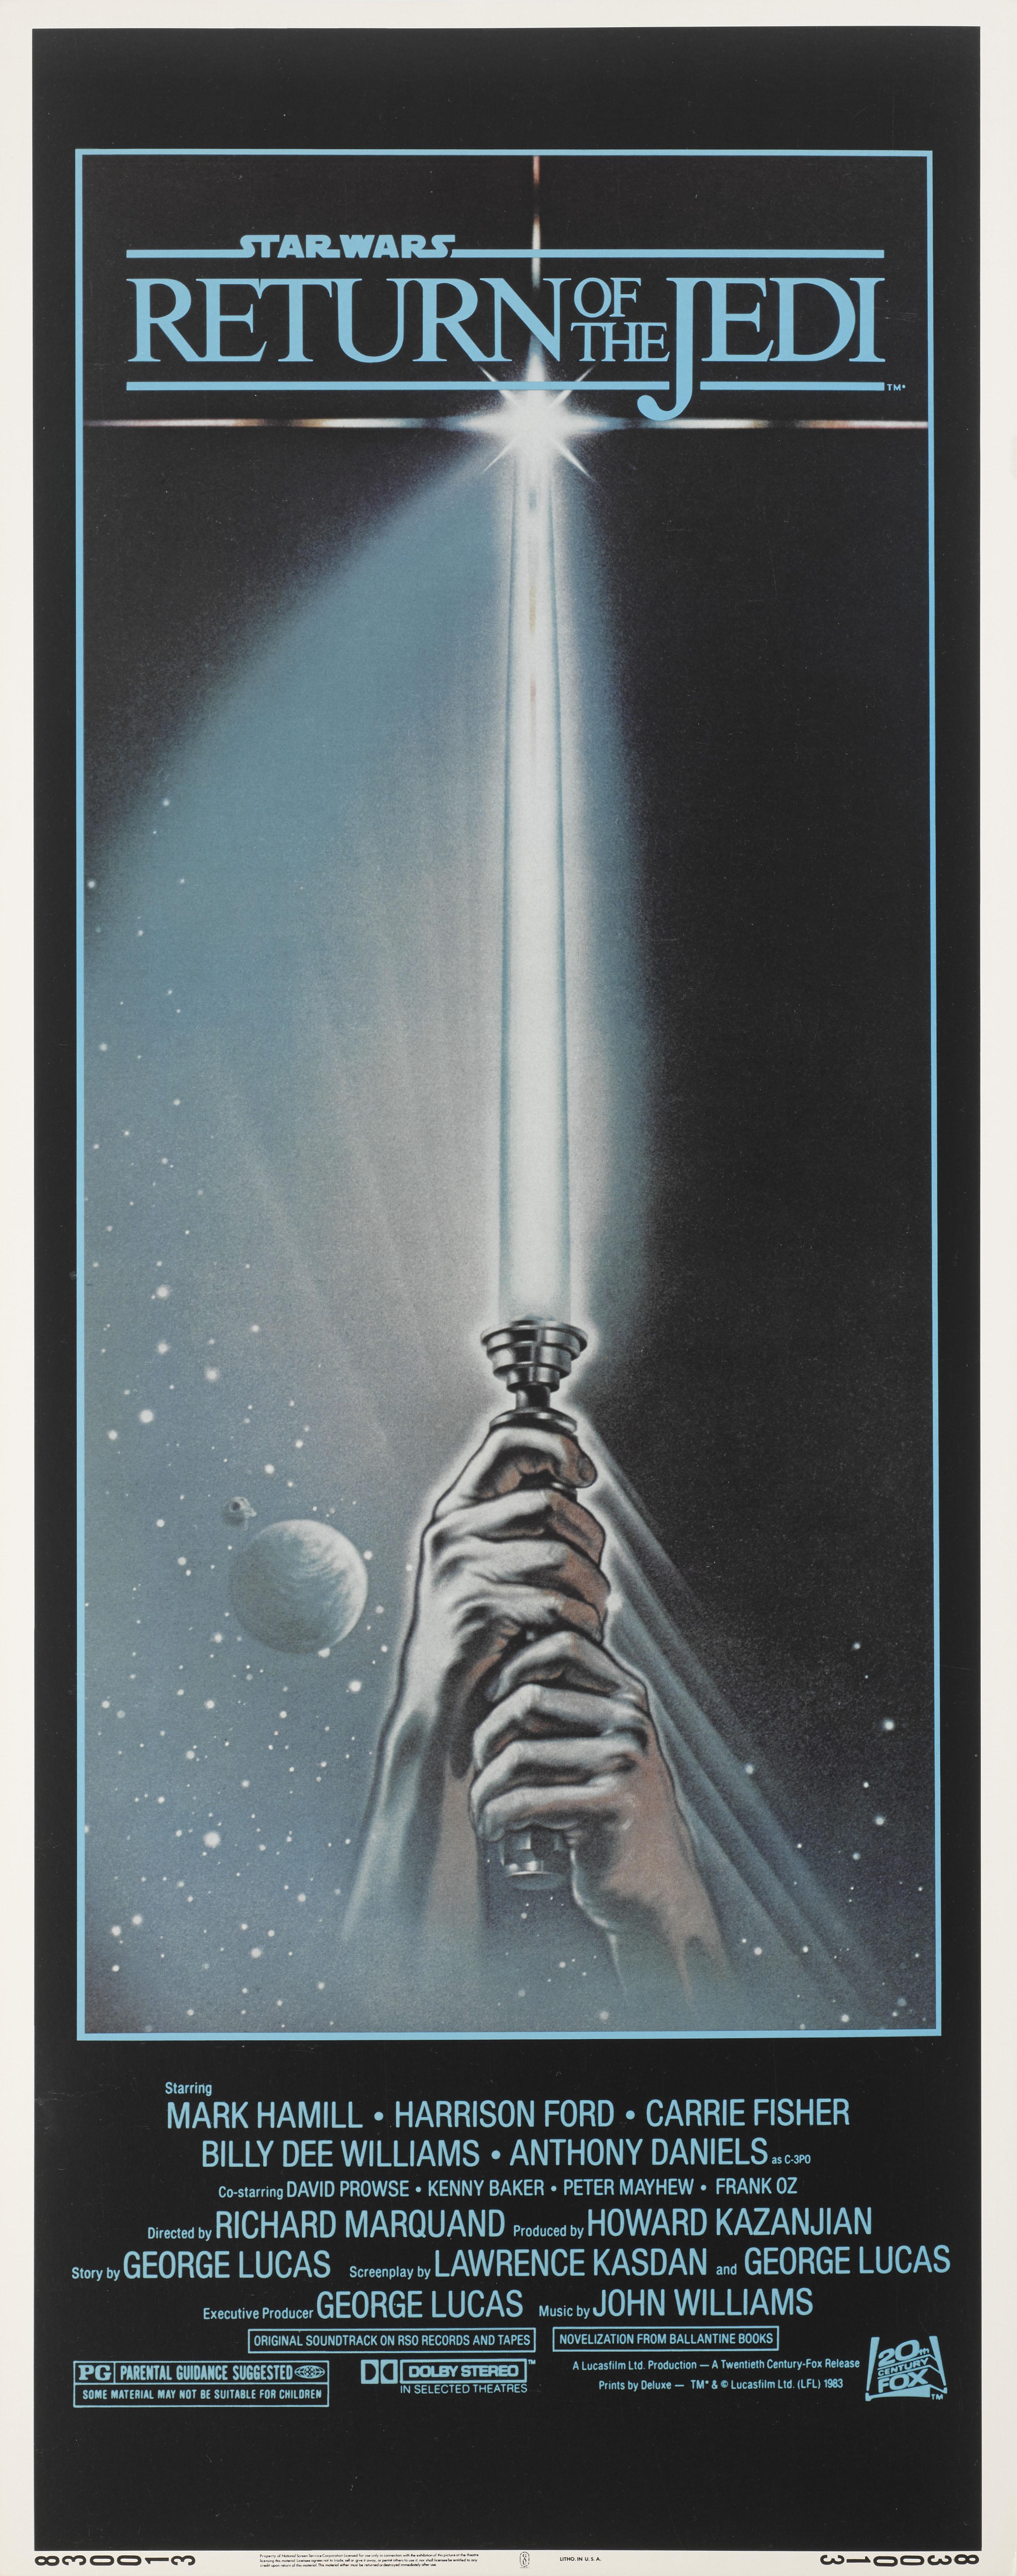 Original US film poster for the 1983 Third Star Wars film. Staring Mark Hamill, Harrison Ford, Carrie Fisher. The Art work is Tim Reamer (dates unknown) This in near mint condition unfolded and conservation paper backed. It would be shipped in a